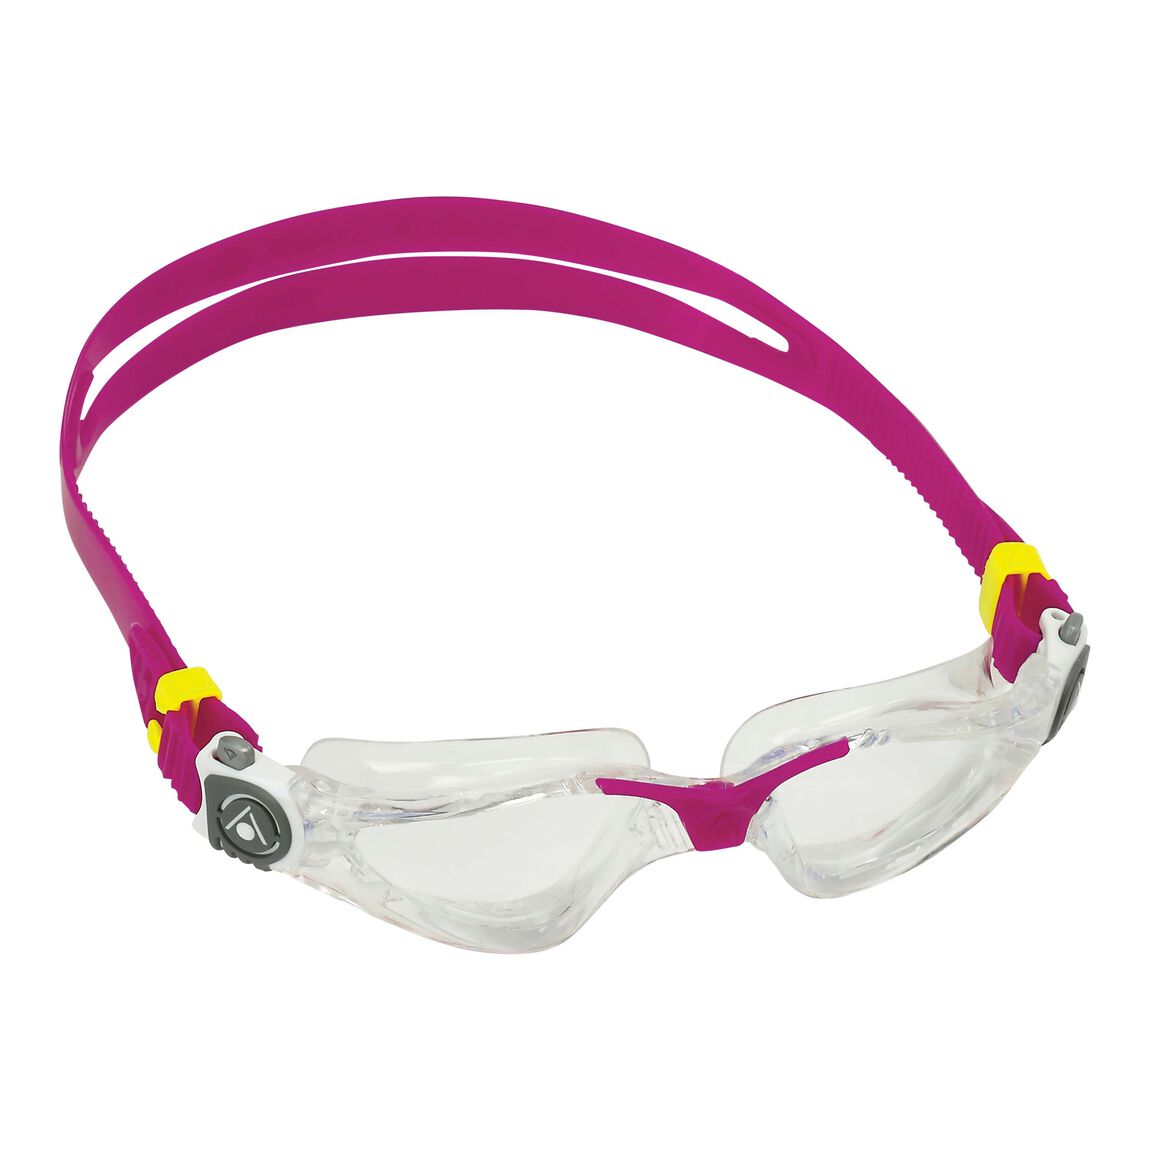 Aqua Sphere Kayenne compact Clear&Raspberry / Clear - Oyster Diving